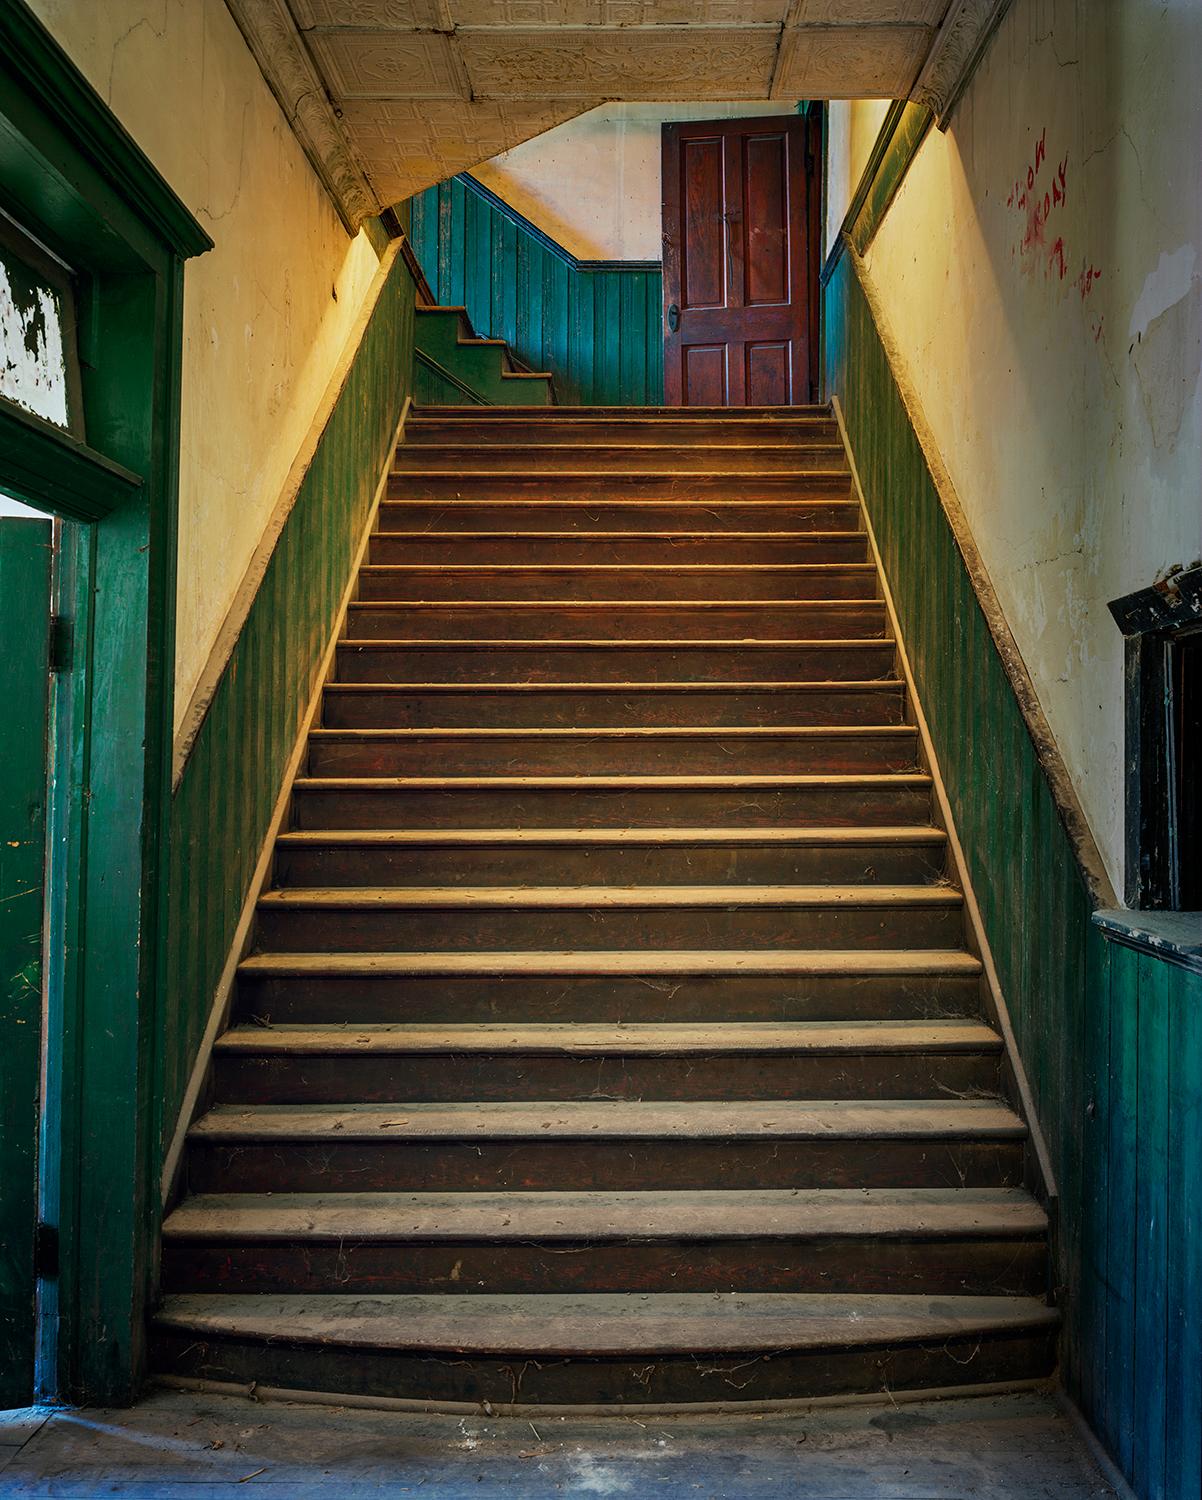 Archival Pigment Print

Stairs to upper balcony, Opera House in Greensboro AL

All available sizes & editions for each size of this photograph:
40" x 30” - Edition of 5 + 2 Artist Proofs
50" X 40"- Edition of 5 + 2 Artist Proofs
60" X 50"-  Edition